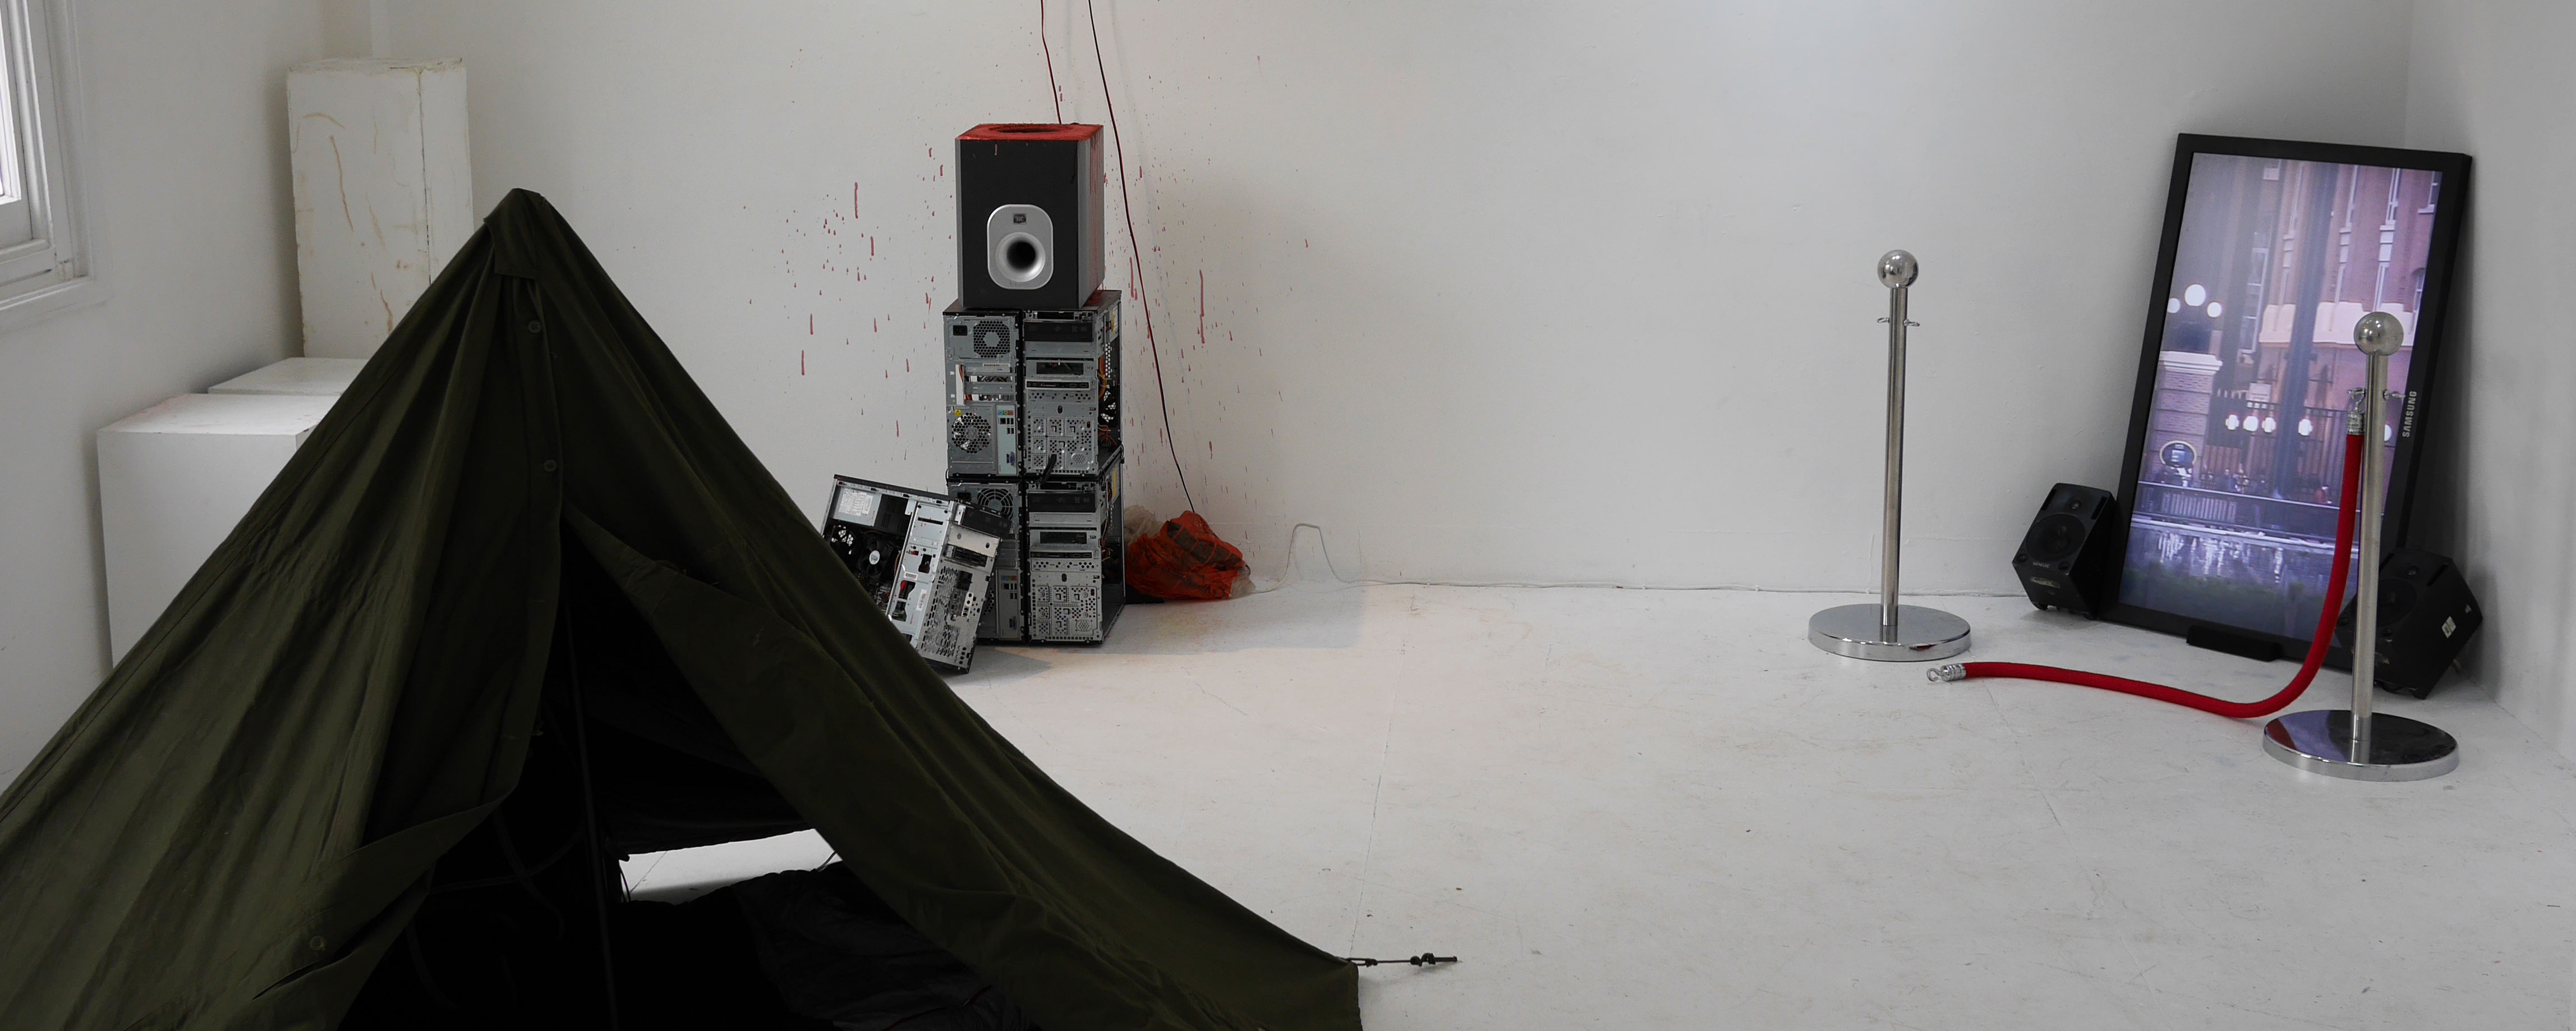 Installation showing a black tent, a screen and speakers.